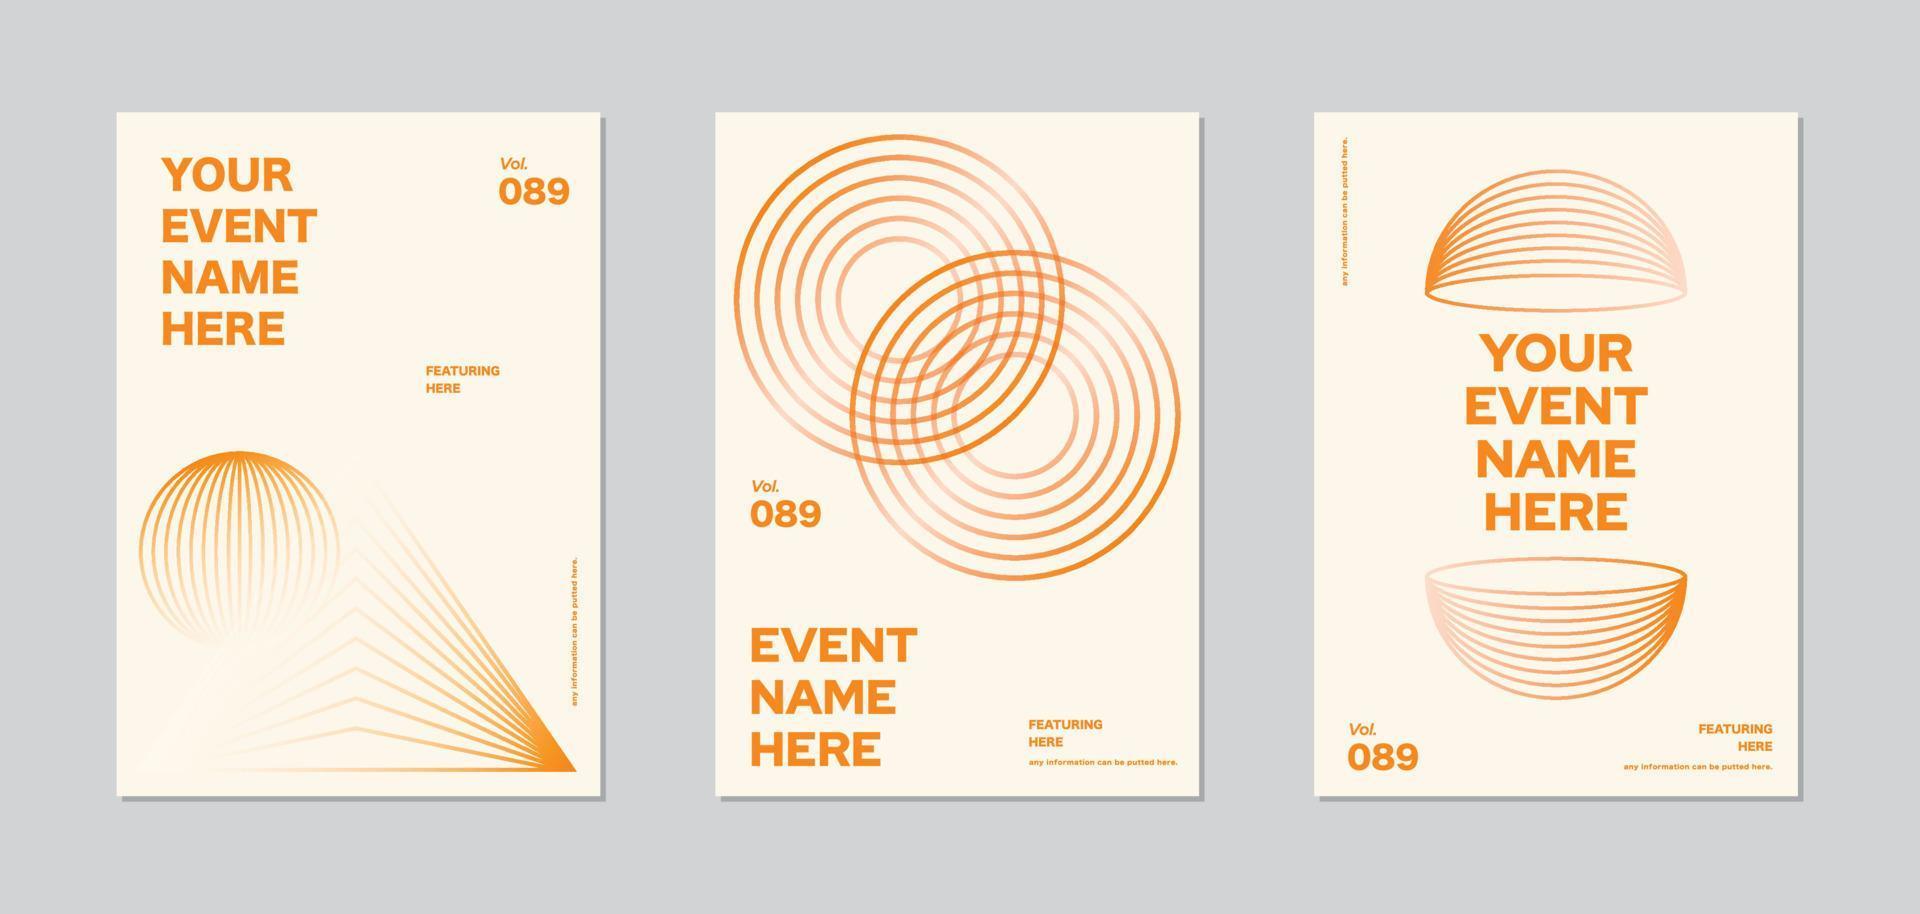 film or events poster layout design set, Abstract shape element graphic gradient circle shape on cover book or magazine cover. Minimal elegant gold brochure modern flyers template, a5 a4 a3 a6 size vector